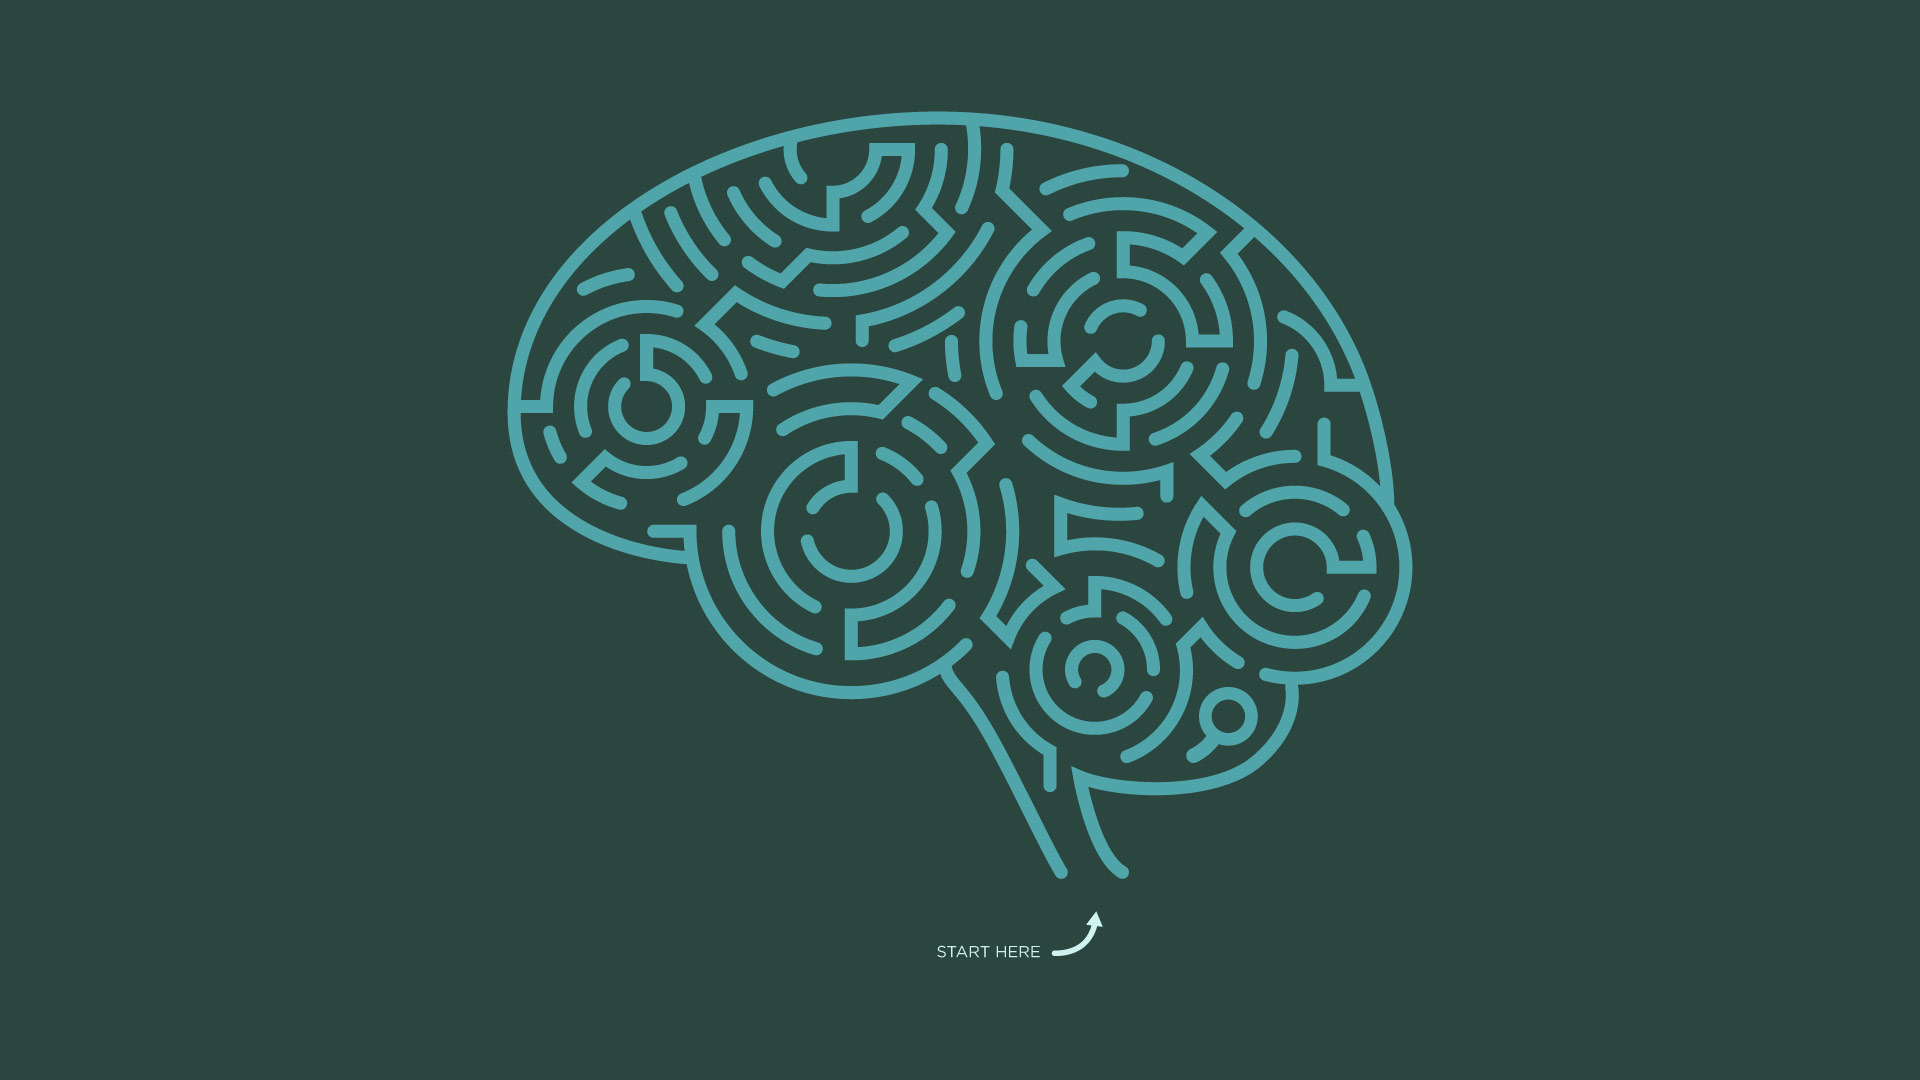 Illustration of a brain maze to represent connecting with emotions through meaningful marketing